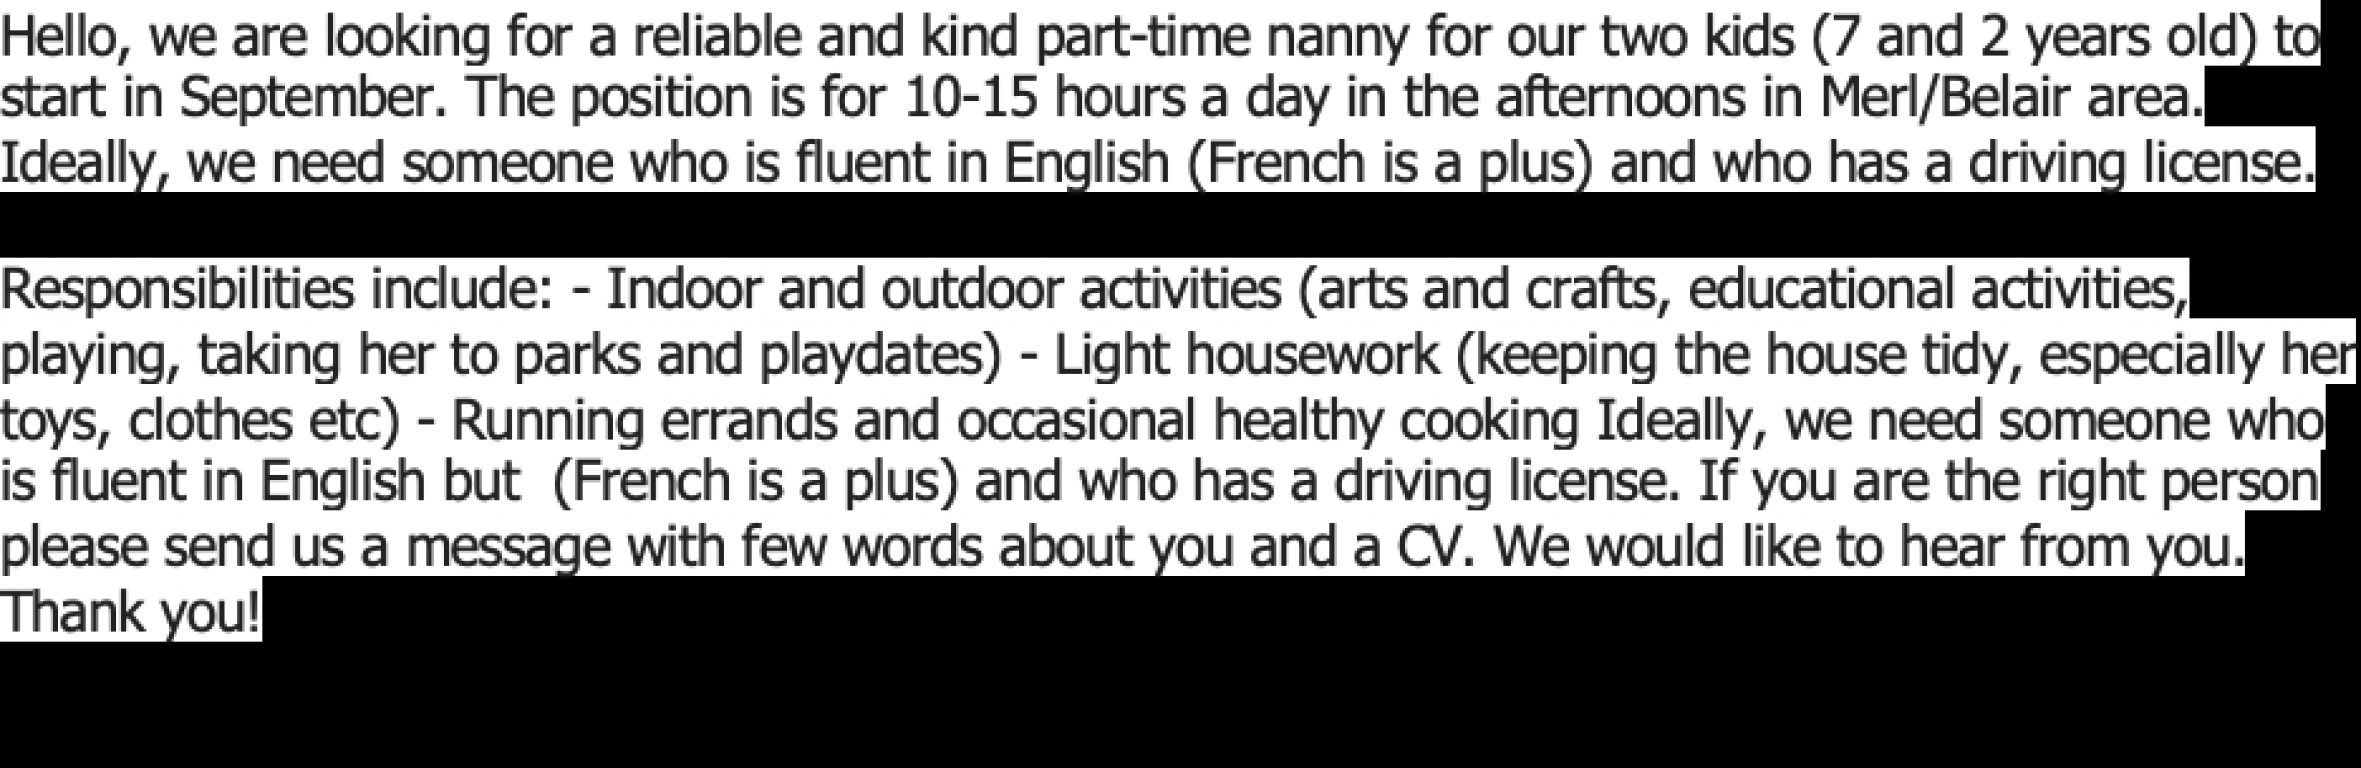 Looking for an after school nanny 